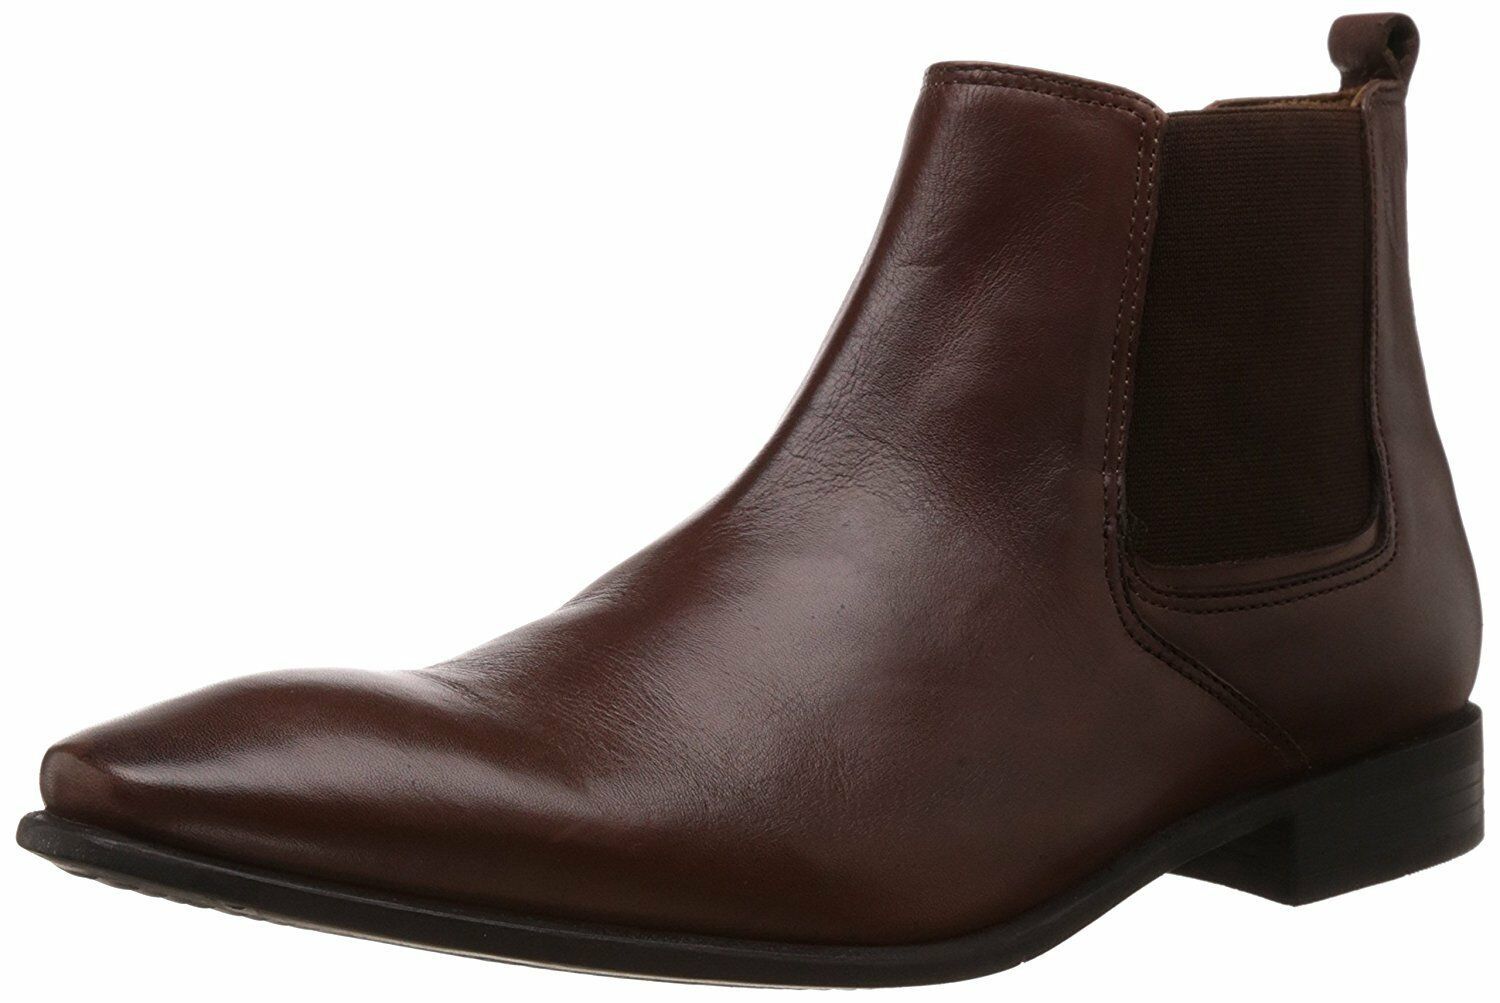 Men's Chelsea Real Leather Boot High Ankle Brown Pointed Toe Slip On US 7-16